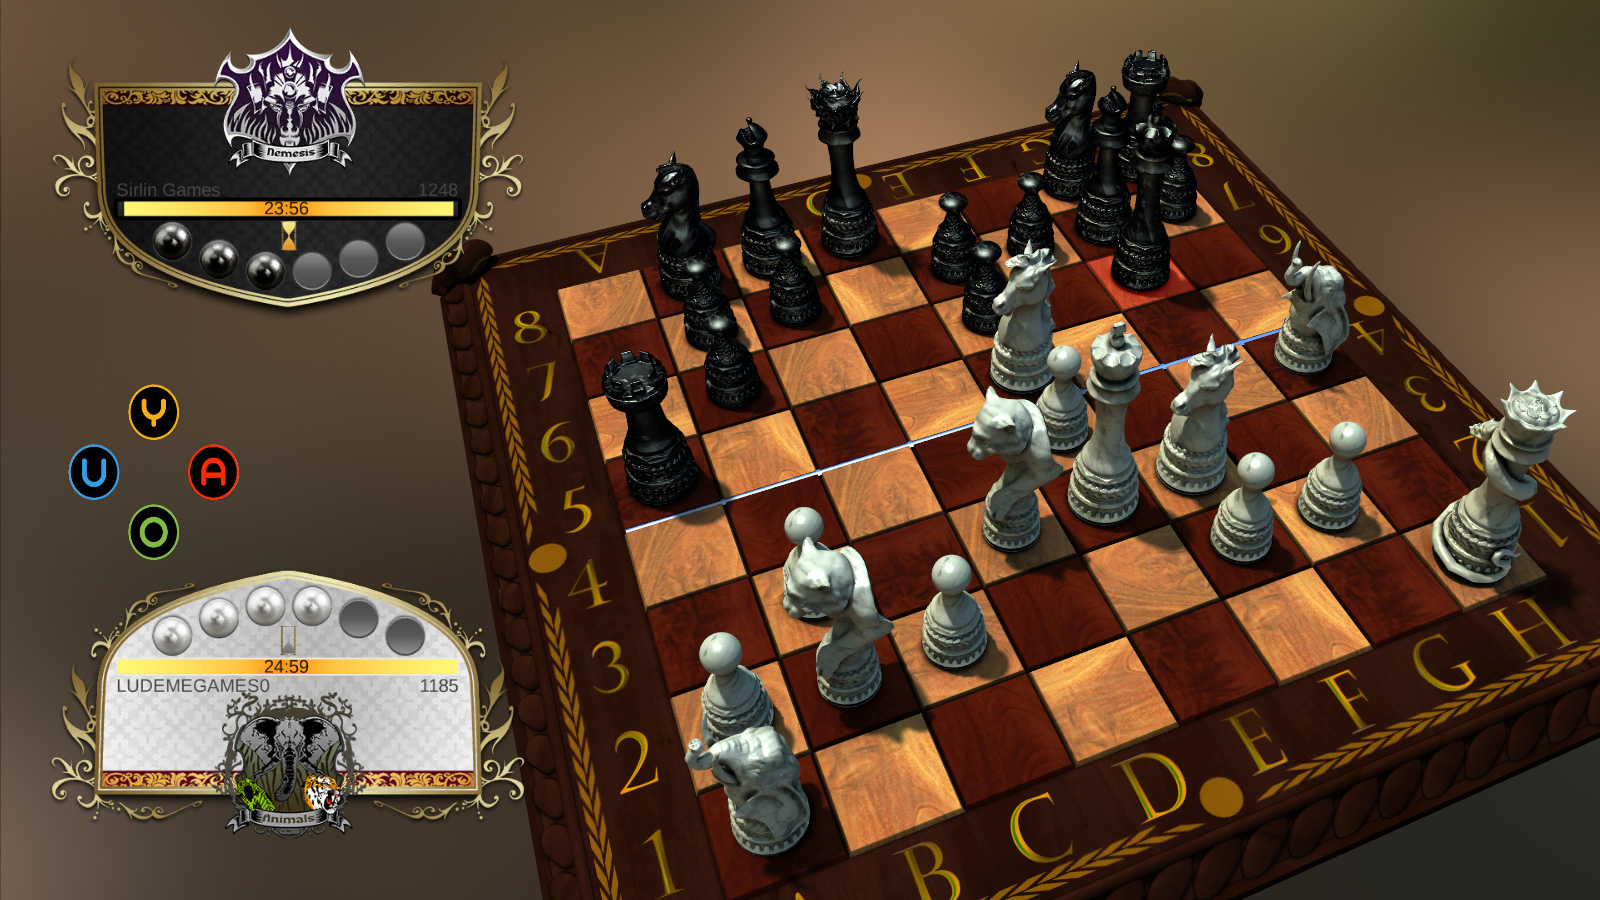 The classic game of chess has found a new home: Twitch — University XP